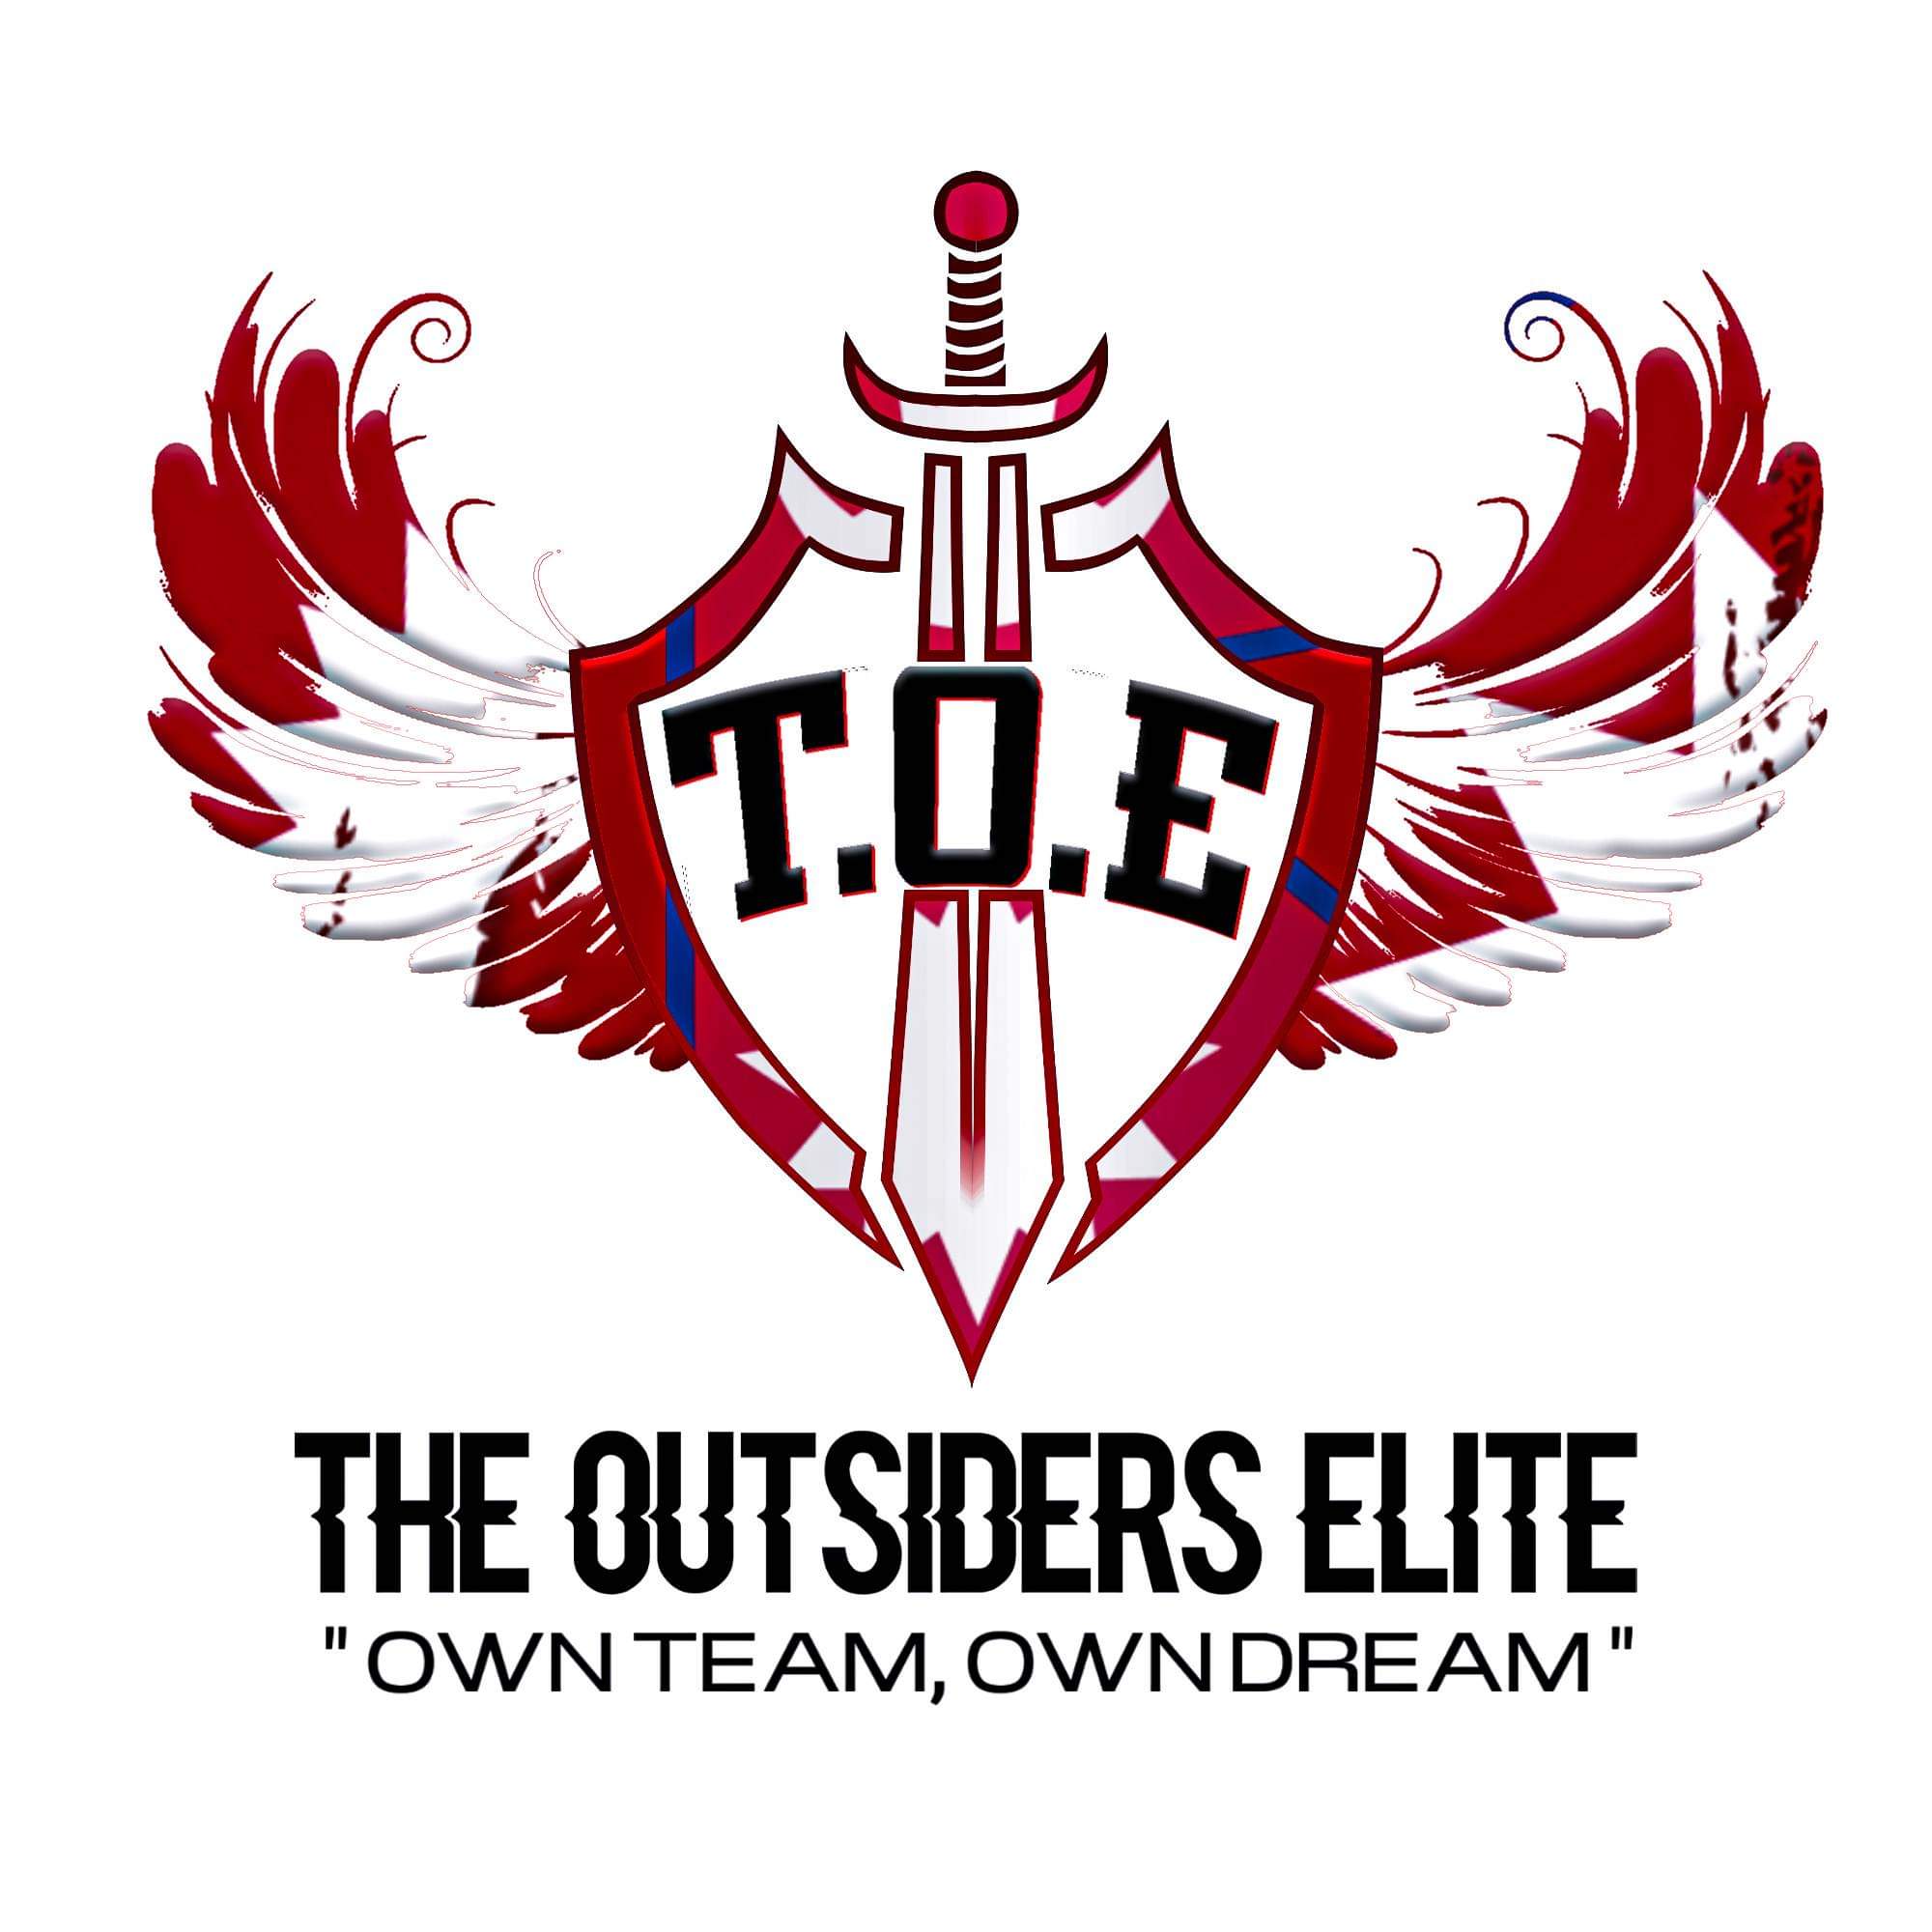 THE OUT SIDERS ELITE